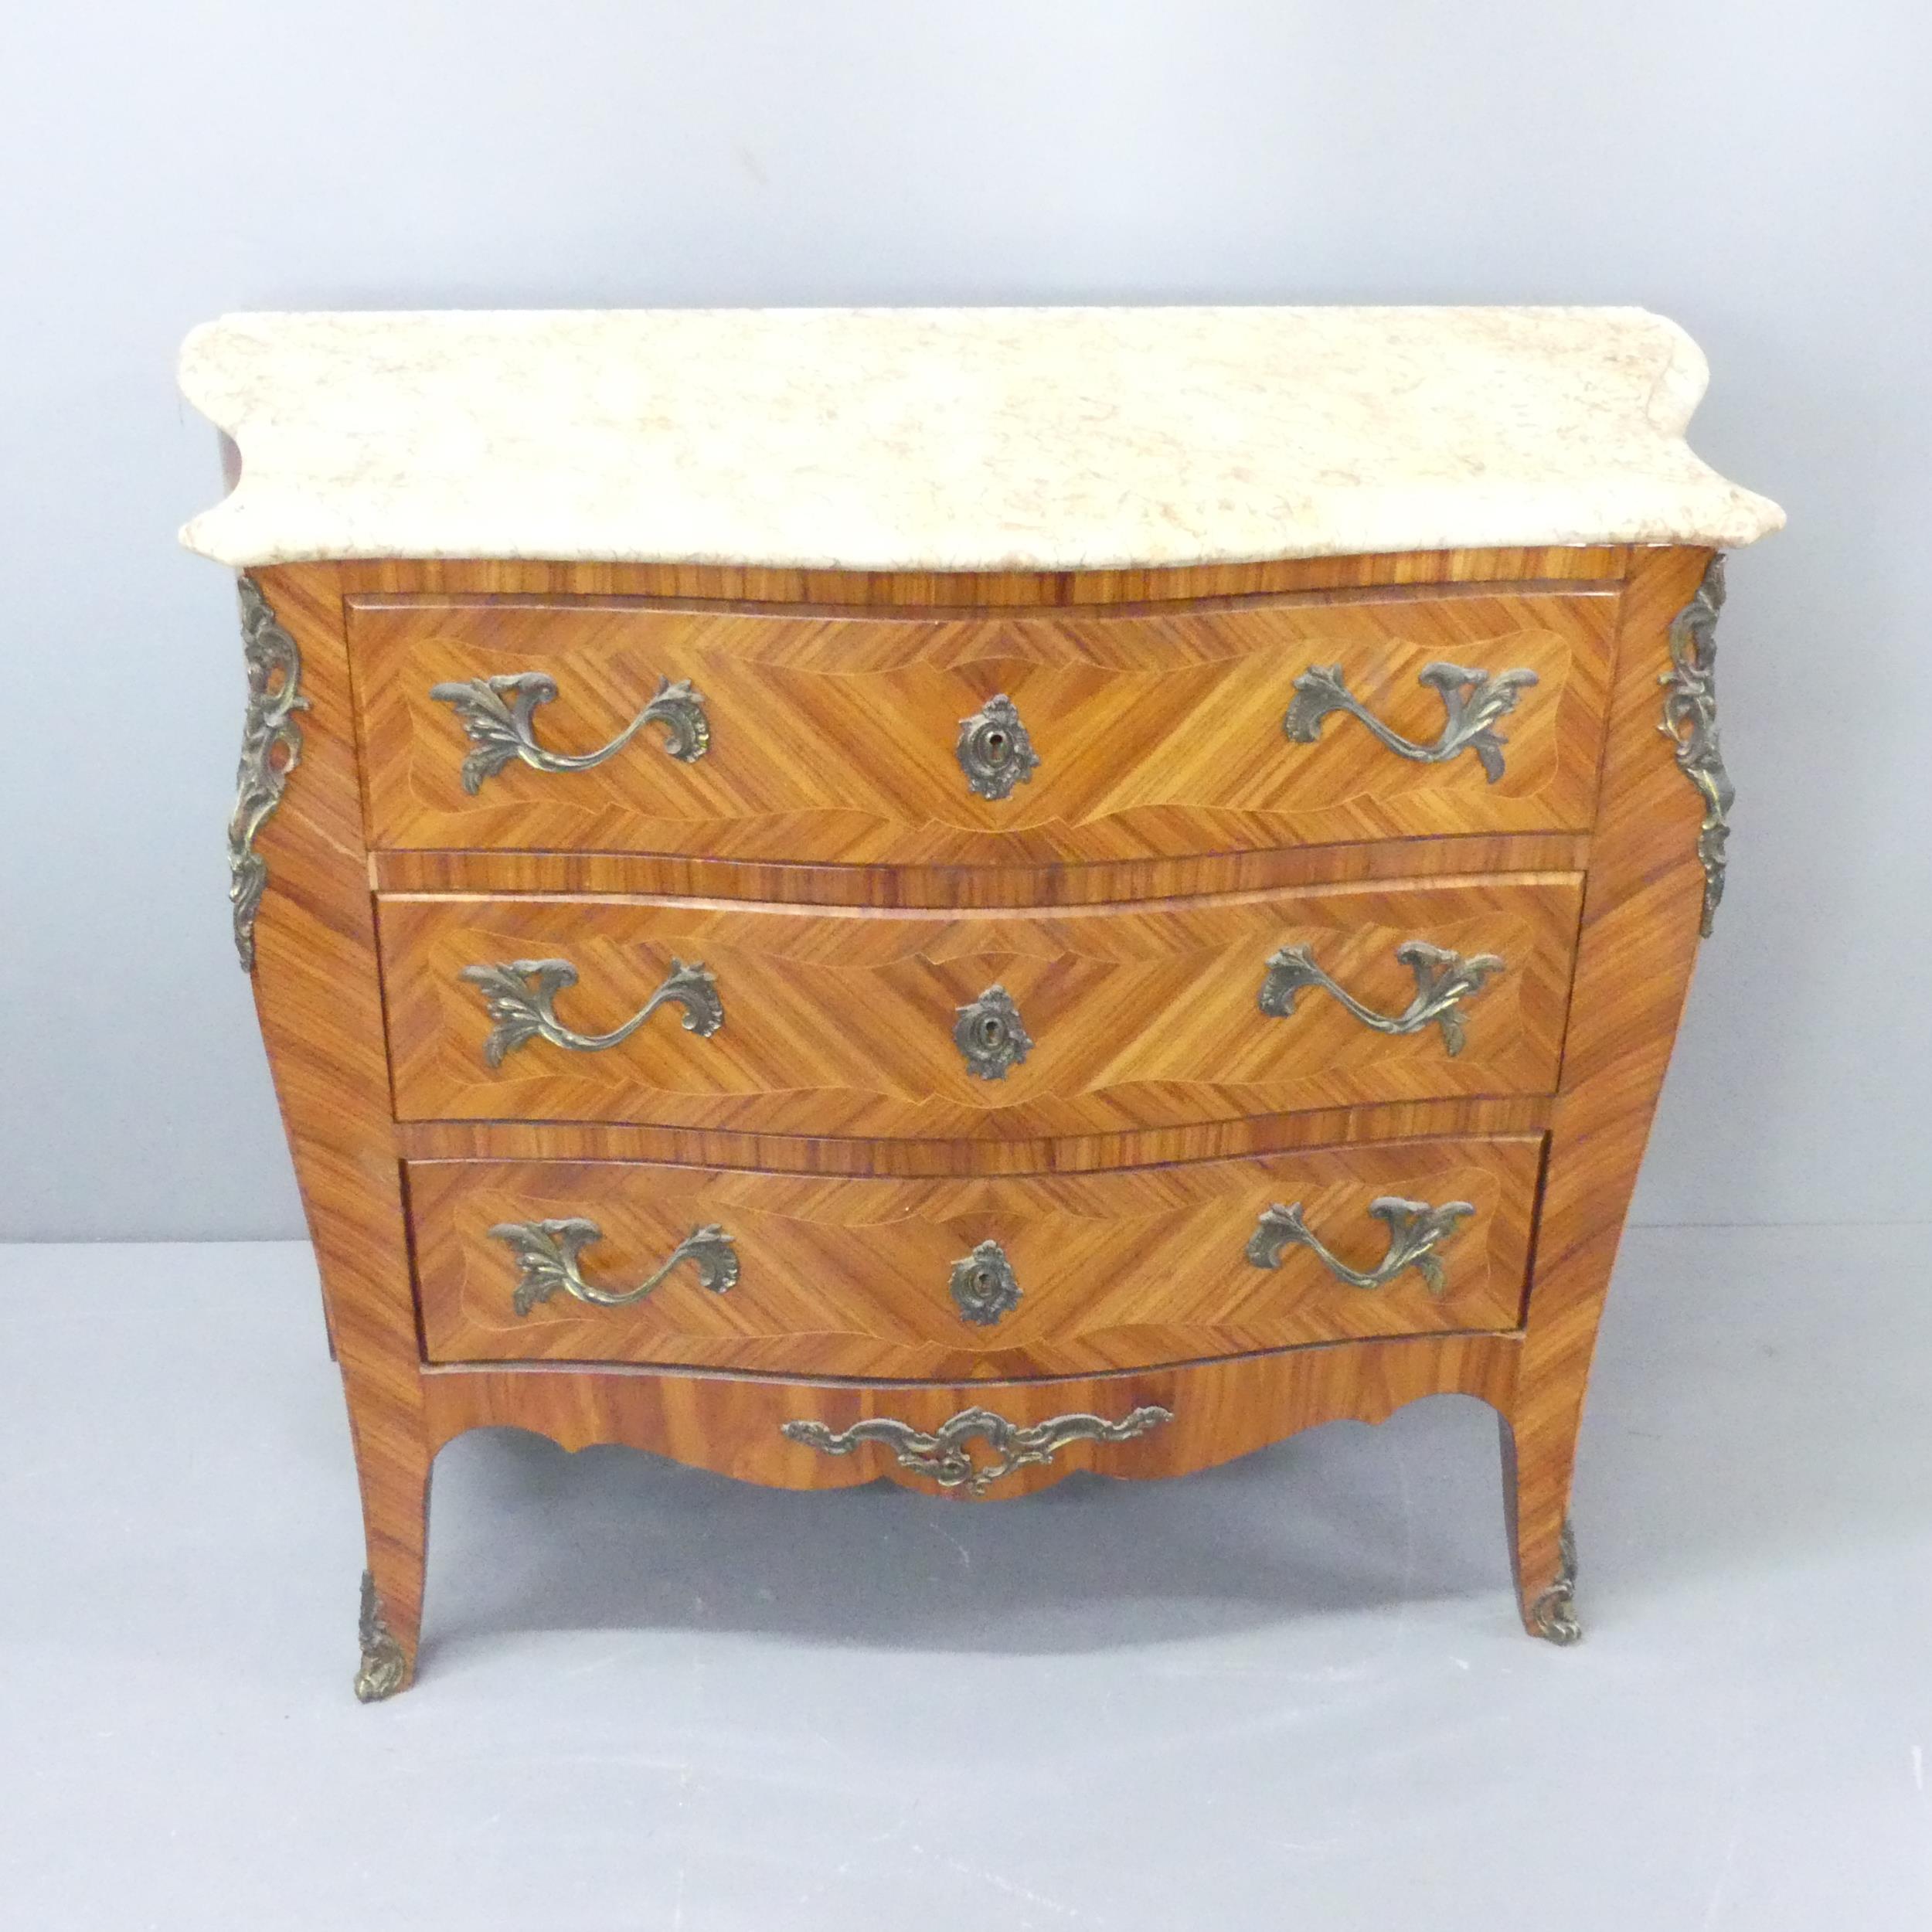 A French kingwood Louis XVI style chest of three drawers with serpentine marble topped. 100x81x46cm